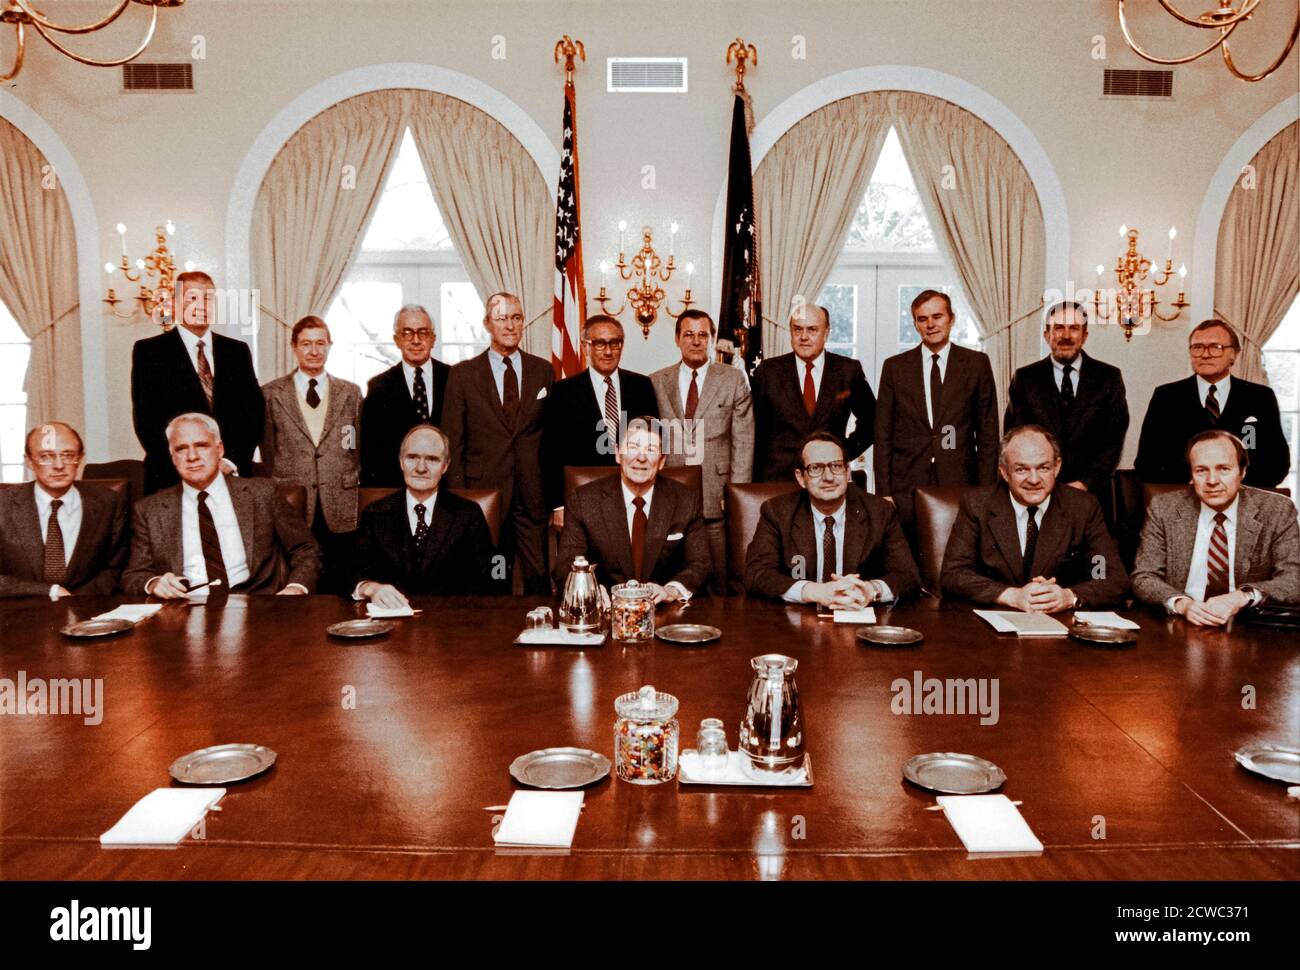 In this photo released by the White House, United States President Ronald Reagan poses with the President’s Commission on Strategic Forces and the Special Counselors to the commission in in the Cabinet Room of the White House in Washington, DC on February 9, 1983.  Seated in the front row: James Woolsey; Dr. James Schlesinger; Brent Scowcroft, Chairman; President Reagan; Dr. John Deutsch; Thomas Reed; Dr. William Perry.  Standing in the back row, from left to right are: John Lyons; Vice Admiral Levering Smith, US Navy (Retired); Lloyd Cutler; Richard Helms; Dr. Henry Kissinger; Donald Rumsfeld Stock Photo